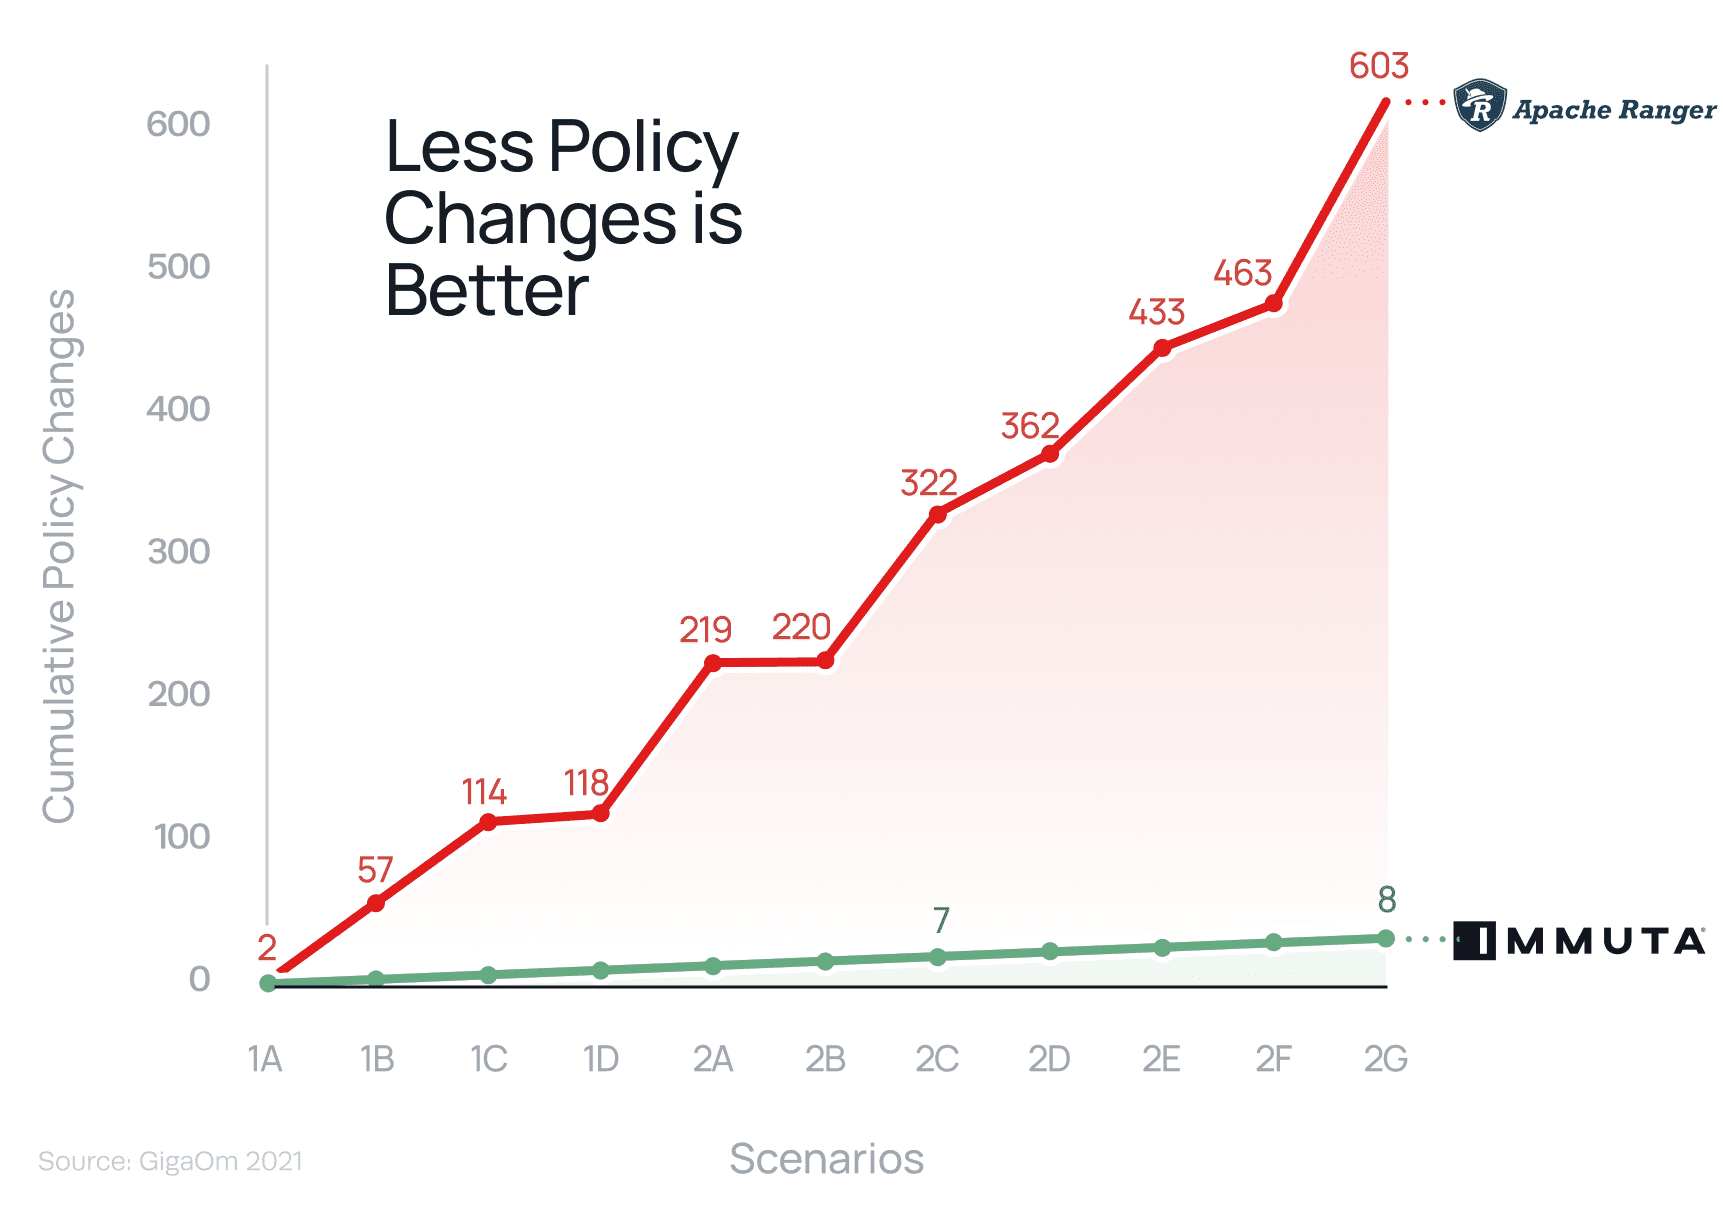 https://www.immuta.com/wp-content/uploads/2021/09/Cumlative-Policy-Changes-Capability-Page@3x.png